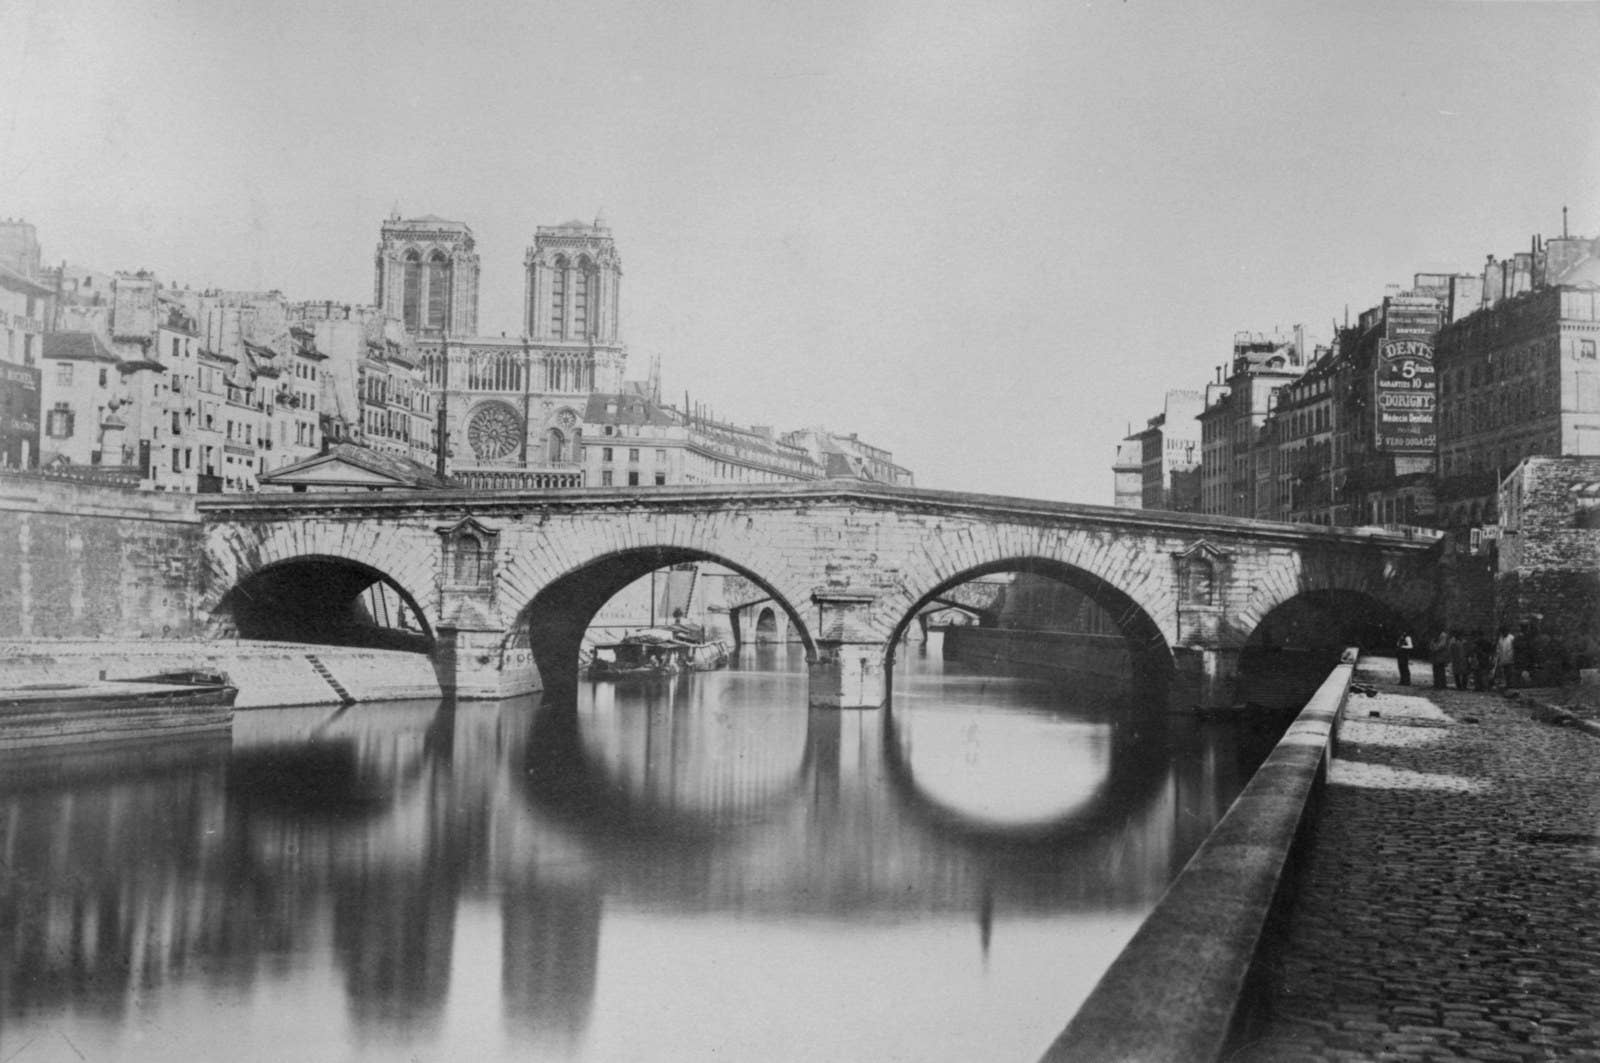 The Saint-Michel bridge, the Hôtel-Dieu, and the Notre-Dame cathedral before 1857.